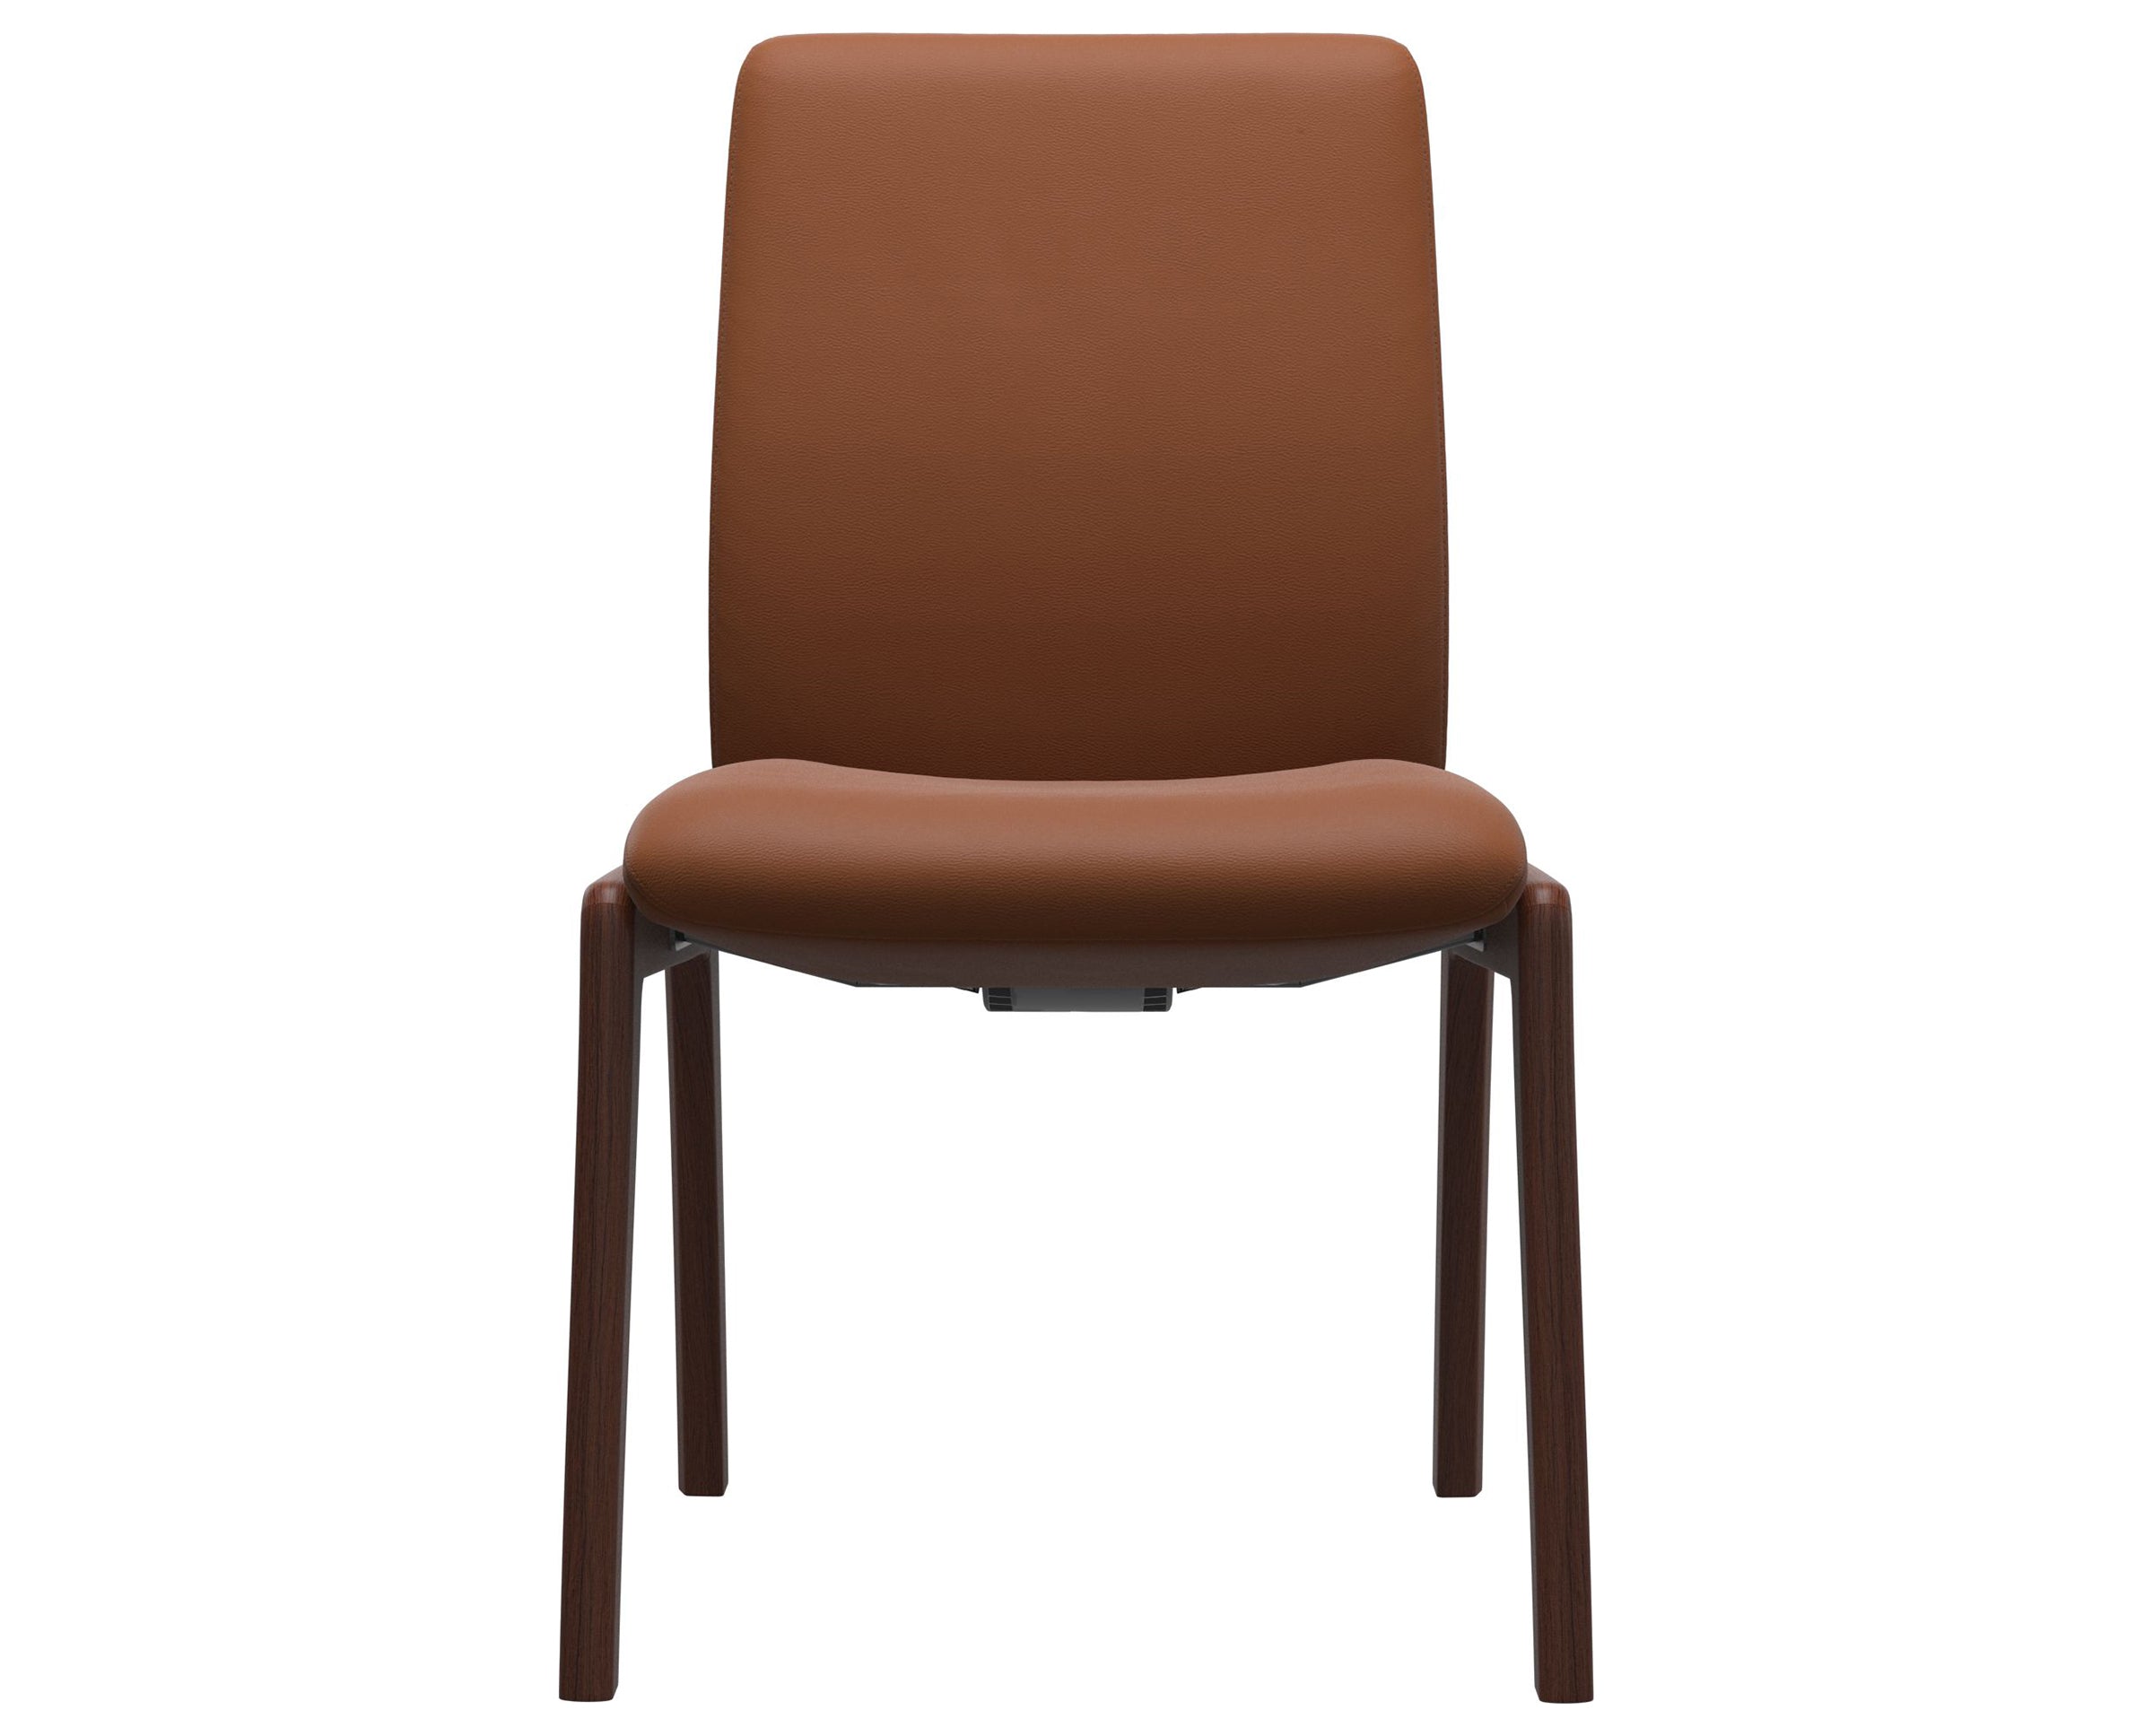 Paloma Leather New Cognac and Walnut Base | Stressless Laurel Low Back D100 Dining Chair | Valley Ridge Furniture